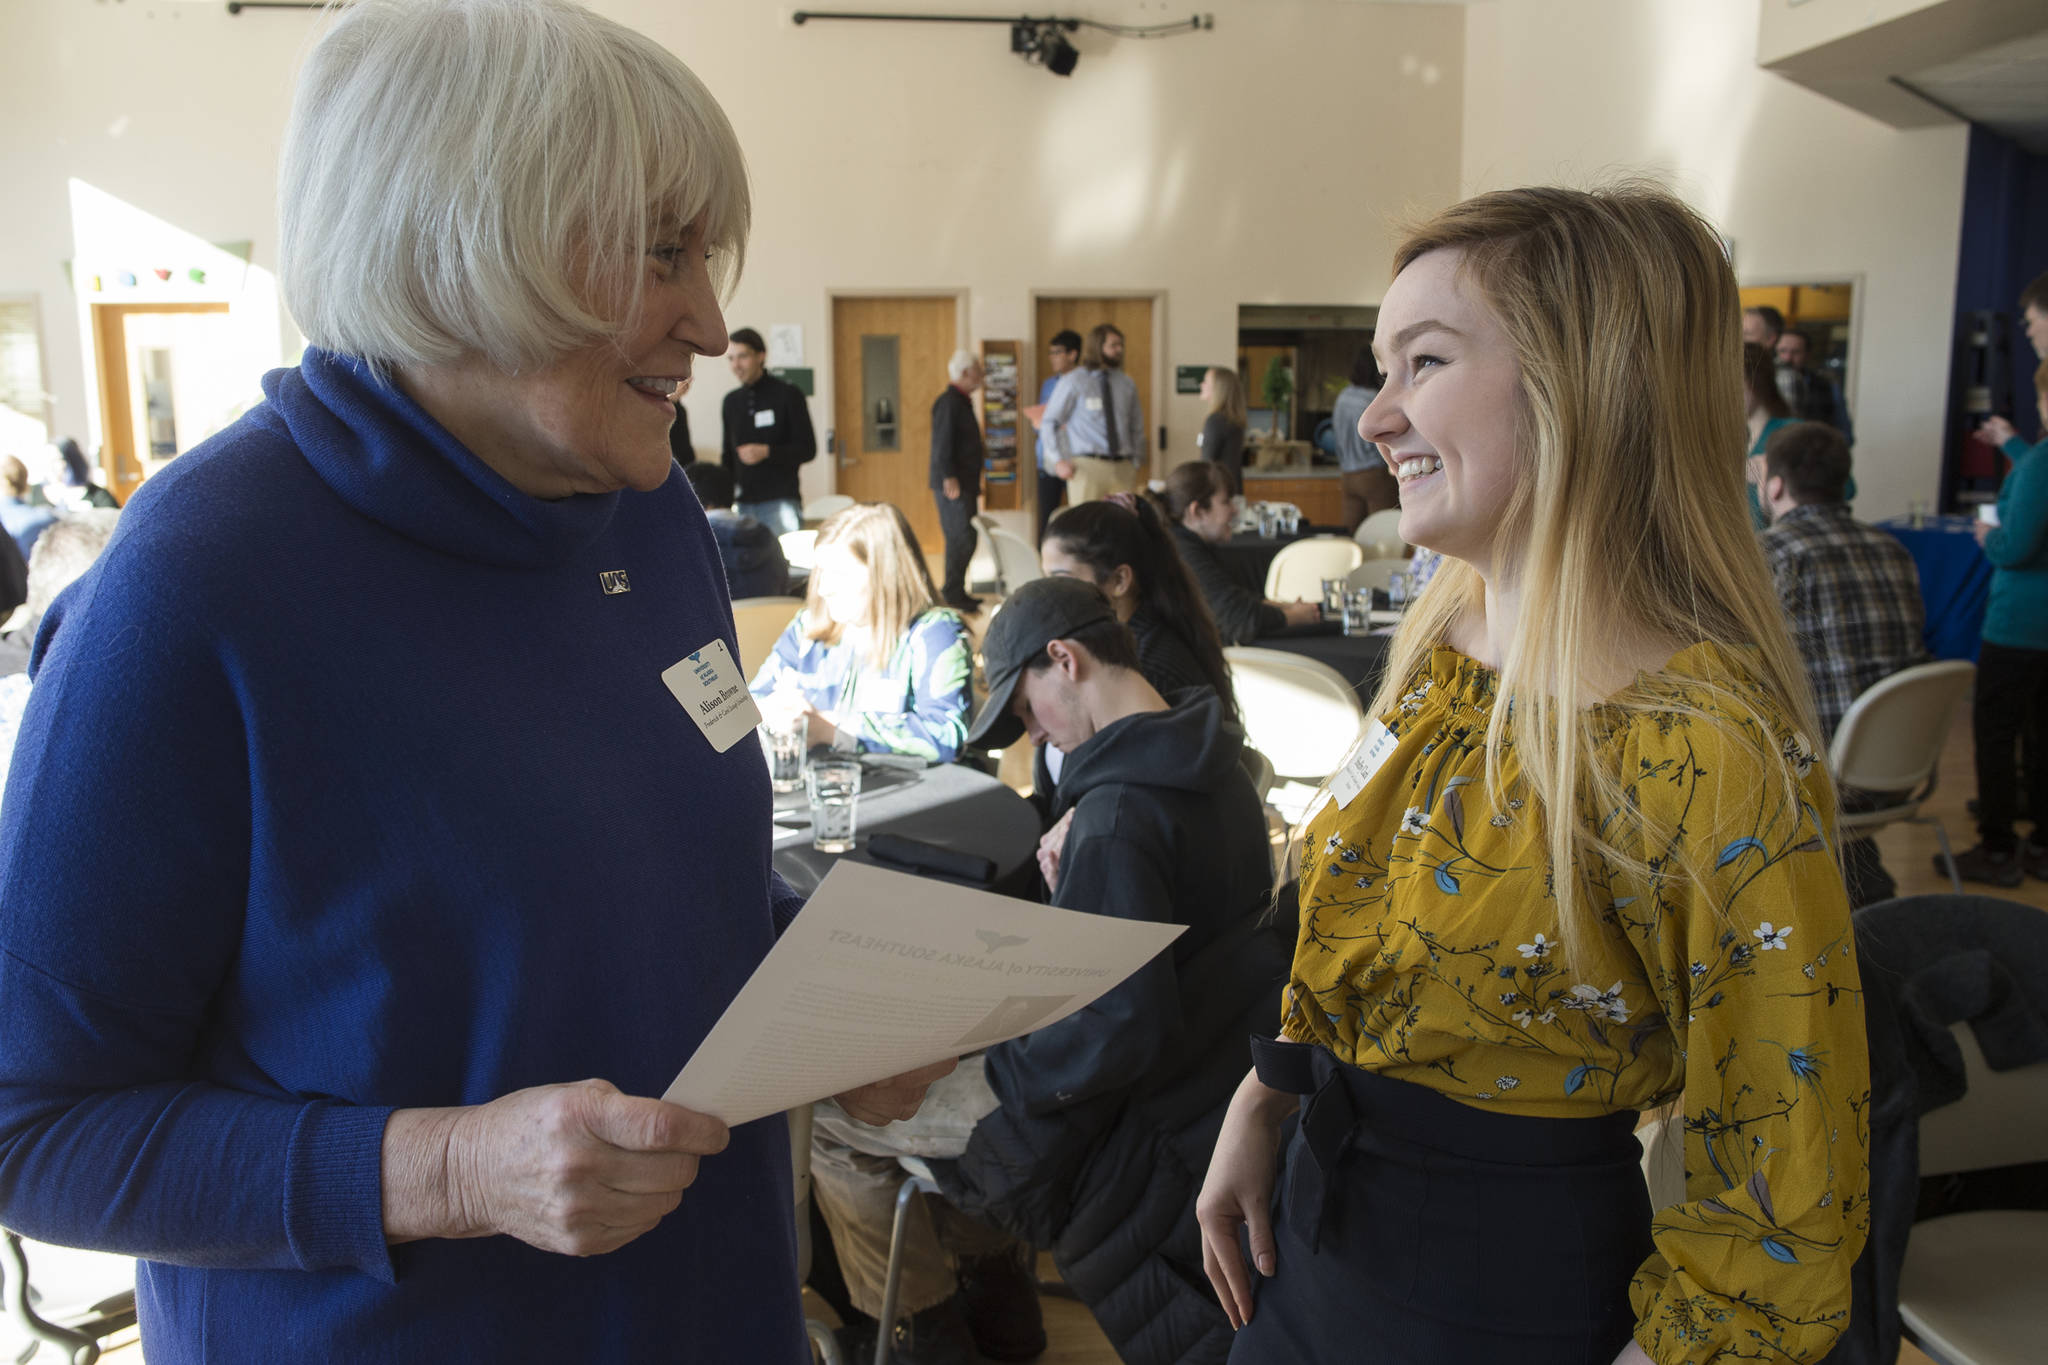 University of Alaska Southeast sophomore Shelby Clark, right, talks with Alison Browne during a scholarship recognition luncheon for 21 student scholarship recipients and their donors at the UAS Rec Center on Friday, Feb. 22, 2019. Clark, a Geography major with an emphasis in Environmental Studies, is the recipient of the Frederick and Carl Eastaugh Scholarship named after Browne’s parents. Corporate and individual donors have contributed more than $300,000 in scholarships to UAS students just this last academic year. (Michael Penn | Juneau Empire)